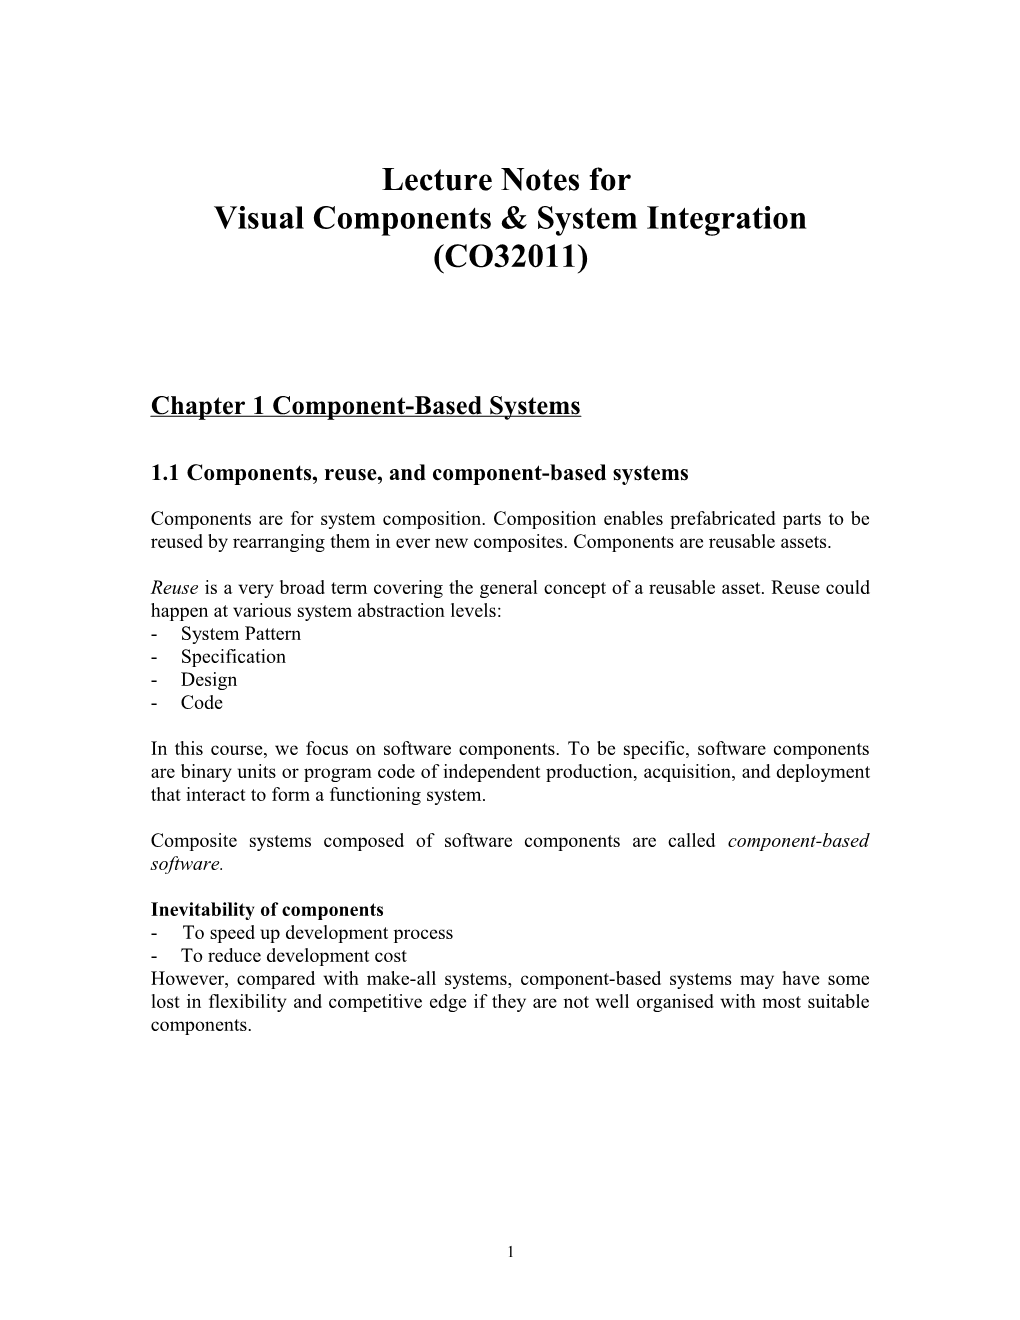 Visual Components & System Integration